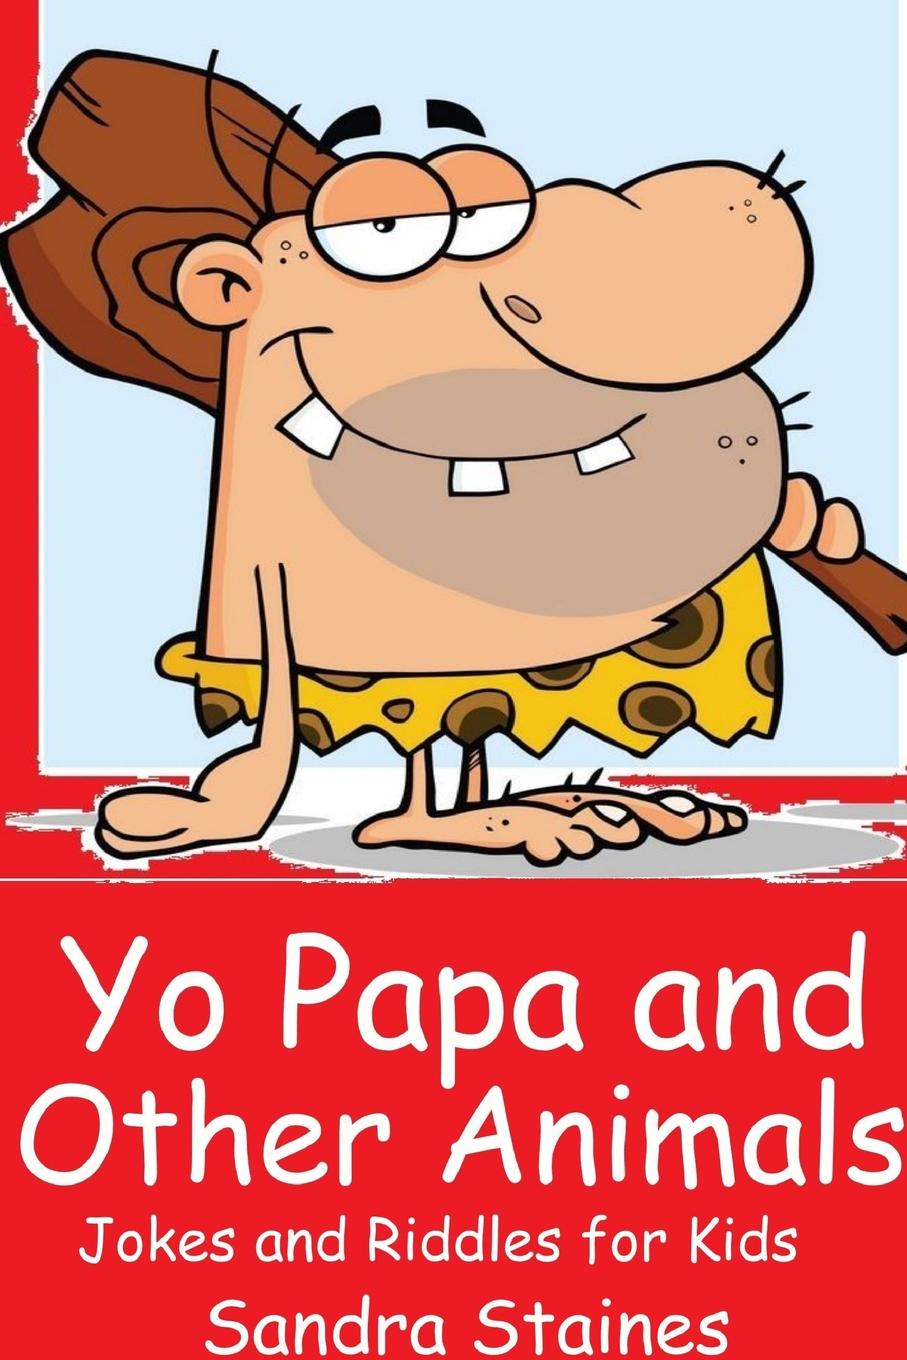 Yo Papa and other Animals. Jokes and Riddles for Kids